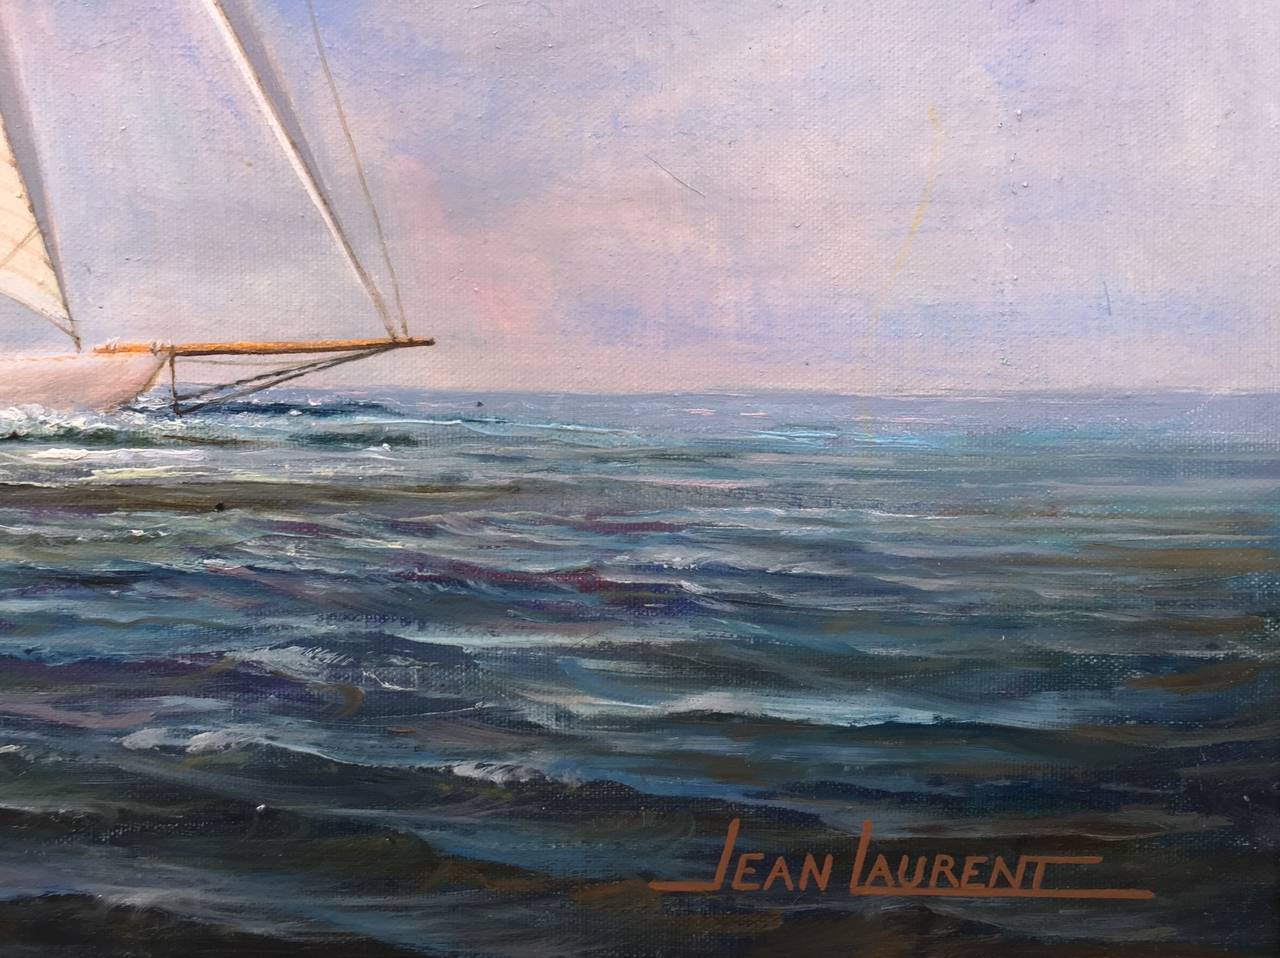 Fabulous acrylic on canvas painting by the French painter Jean Laurent. Done circa 1985 Laurent is well known for his seascapes and died shortly after this painting was done in 1988.  Signed lower right and is in excellent condition.  Housed in its